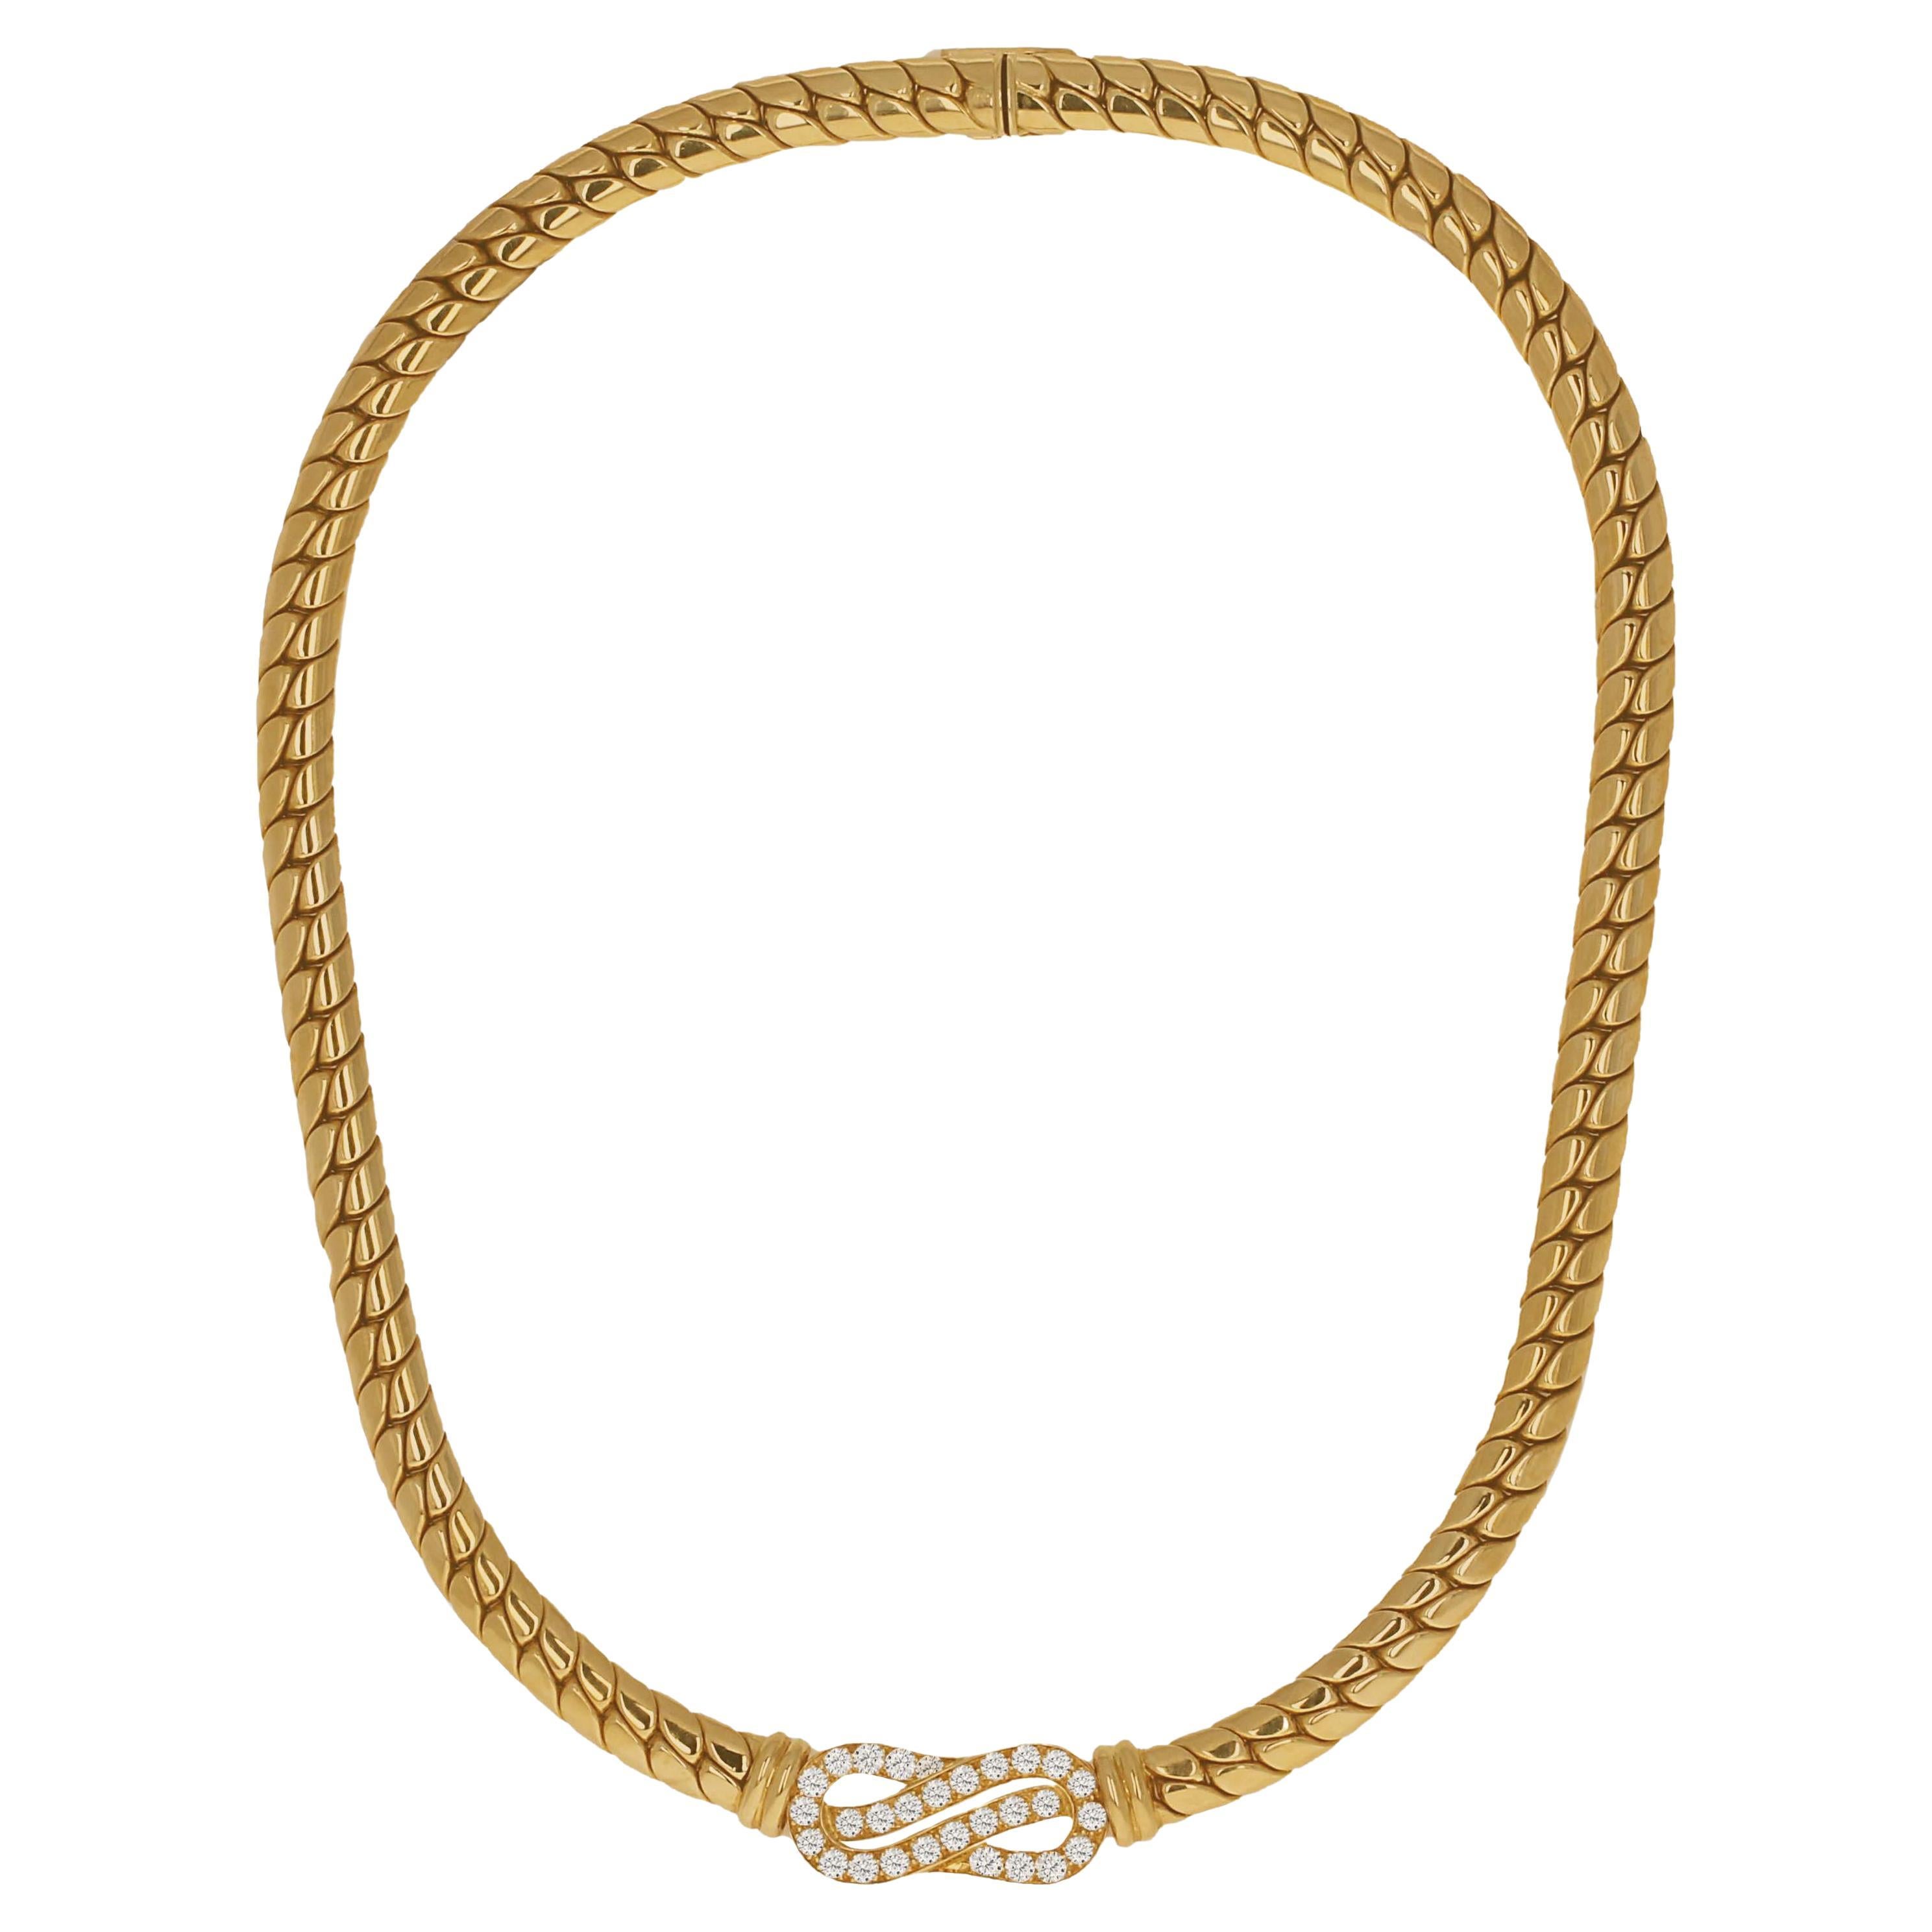 Van Cleef & Arpels "VCA" 18 Karat Yellow Gold and Diamond Necklace For Sale